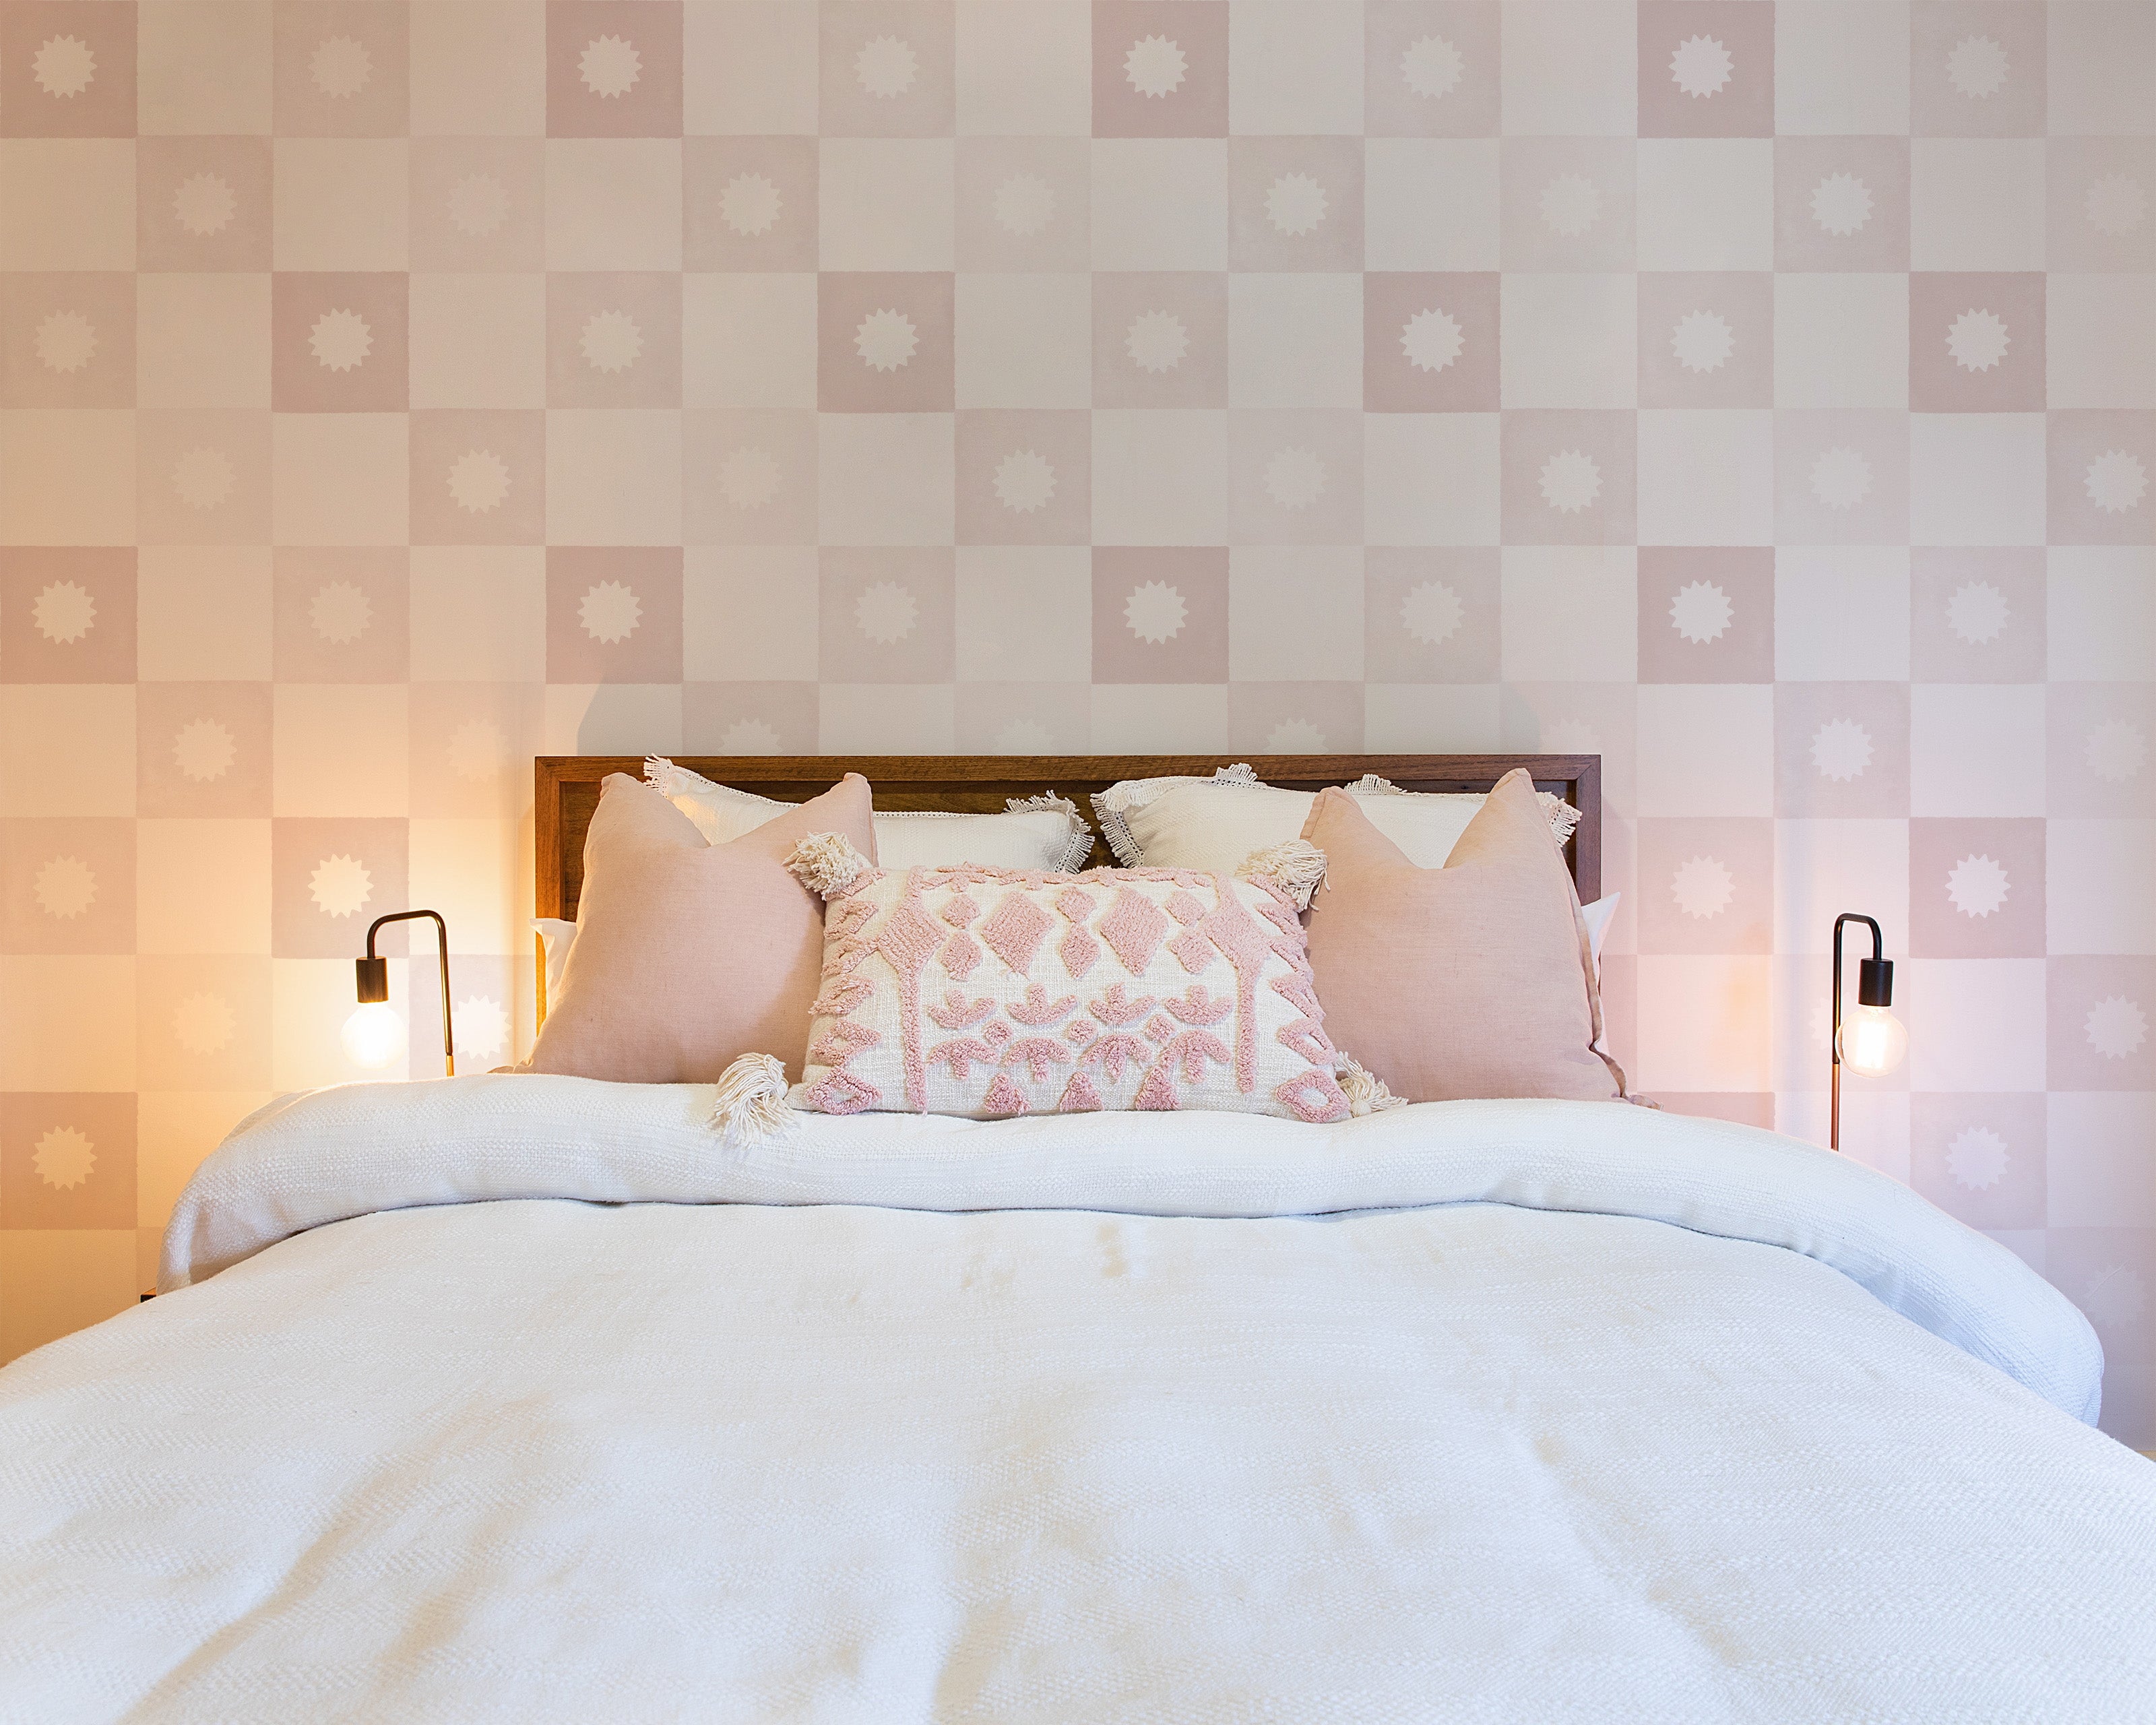 A serene bedroom featuring a large, plush bed with multiple pillows against a soft, pink and white checkered wallpaper with a subtle floral emblem in each square. Two stylish black wall-mounted lamps flank the bed.